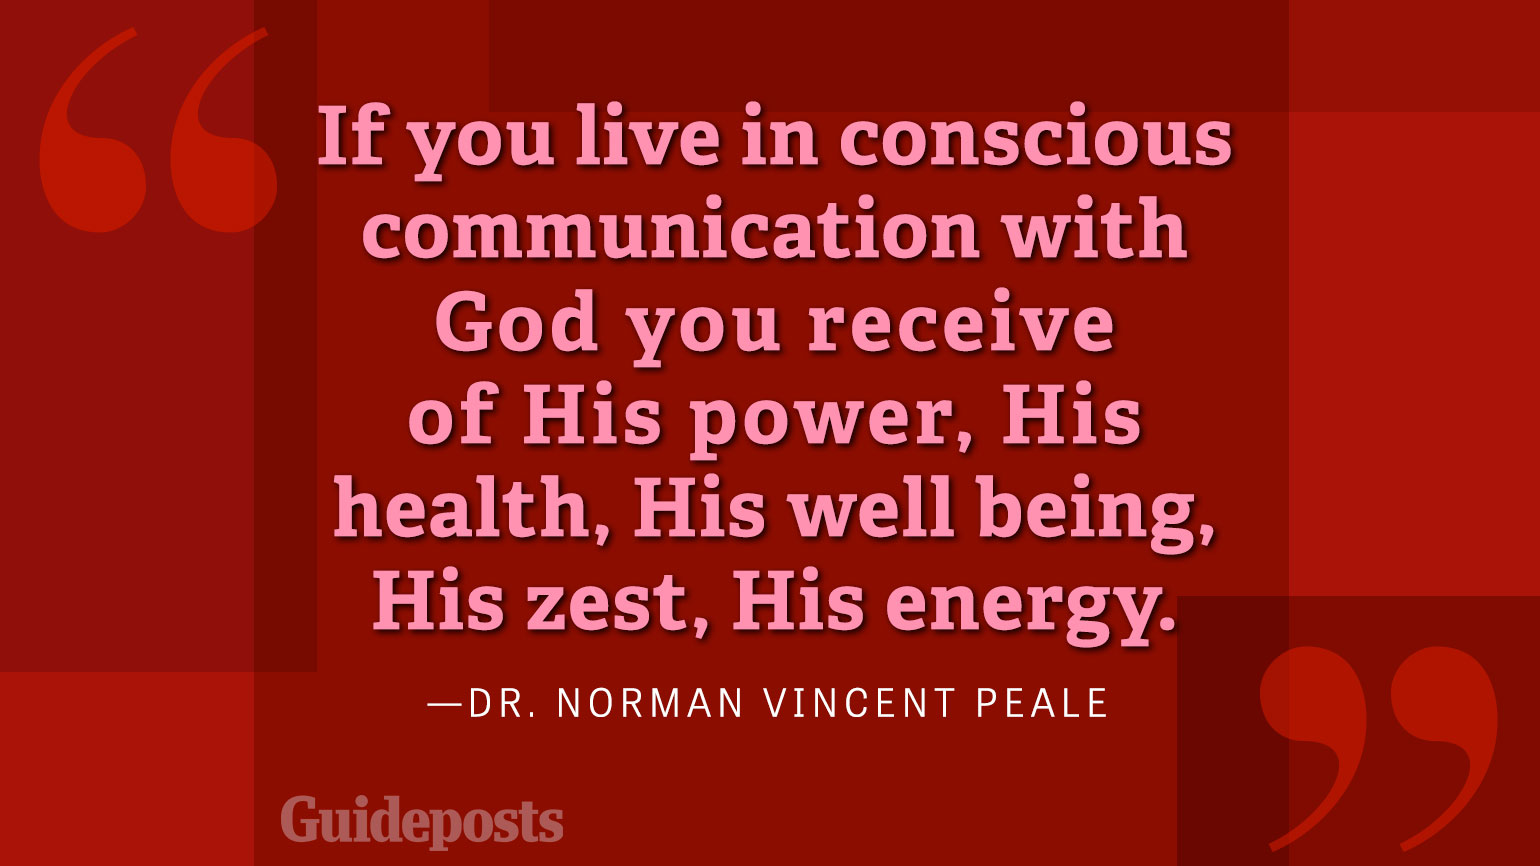 If you live in constant communication with God you recieve of His power, His health, His well being, His zest, His energy.